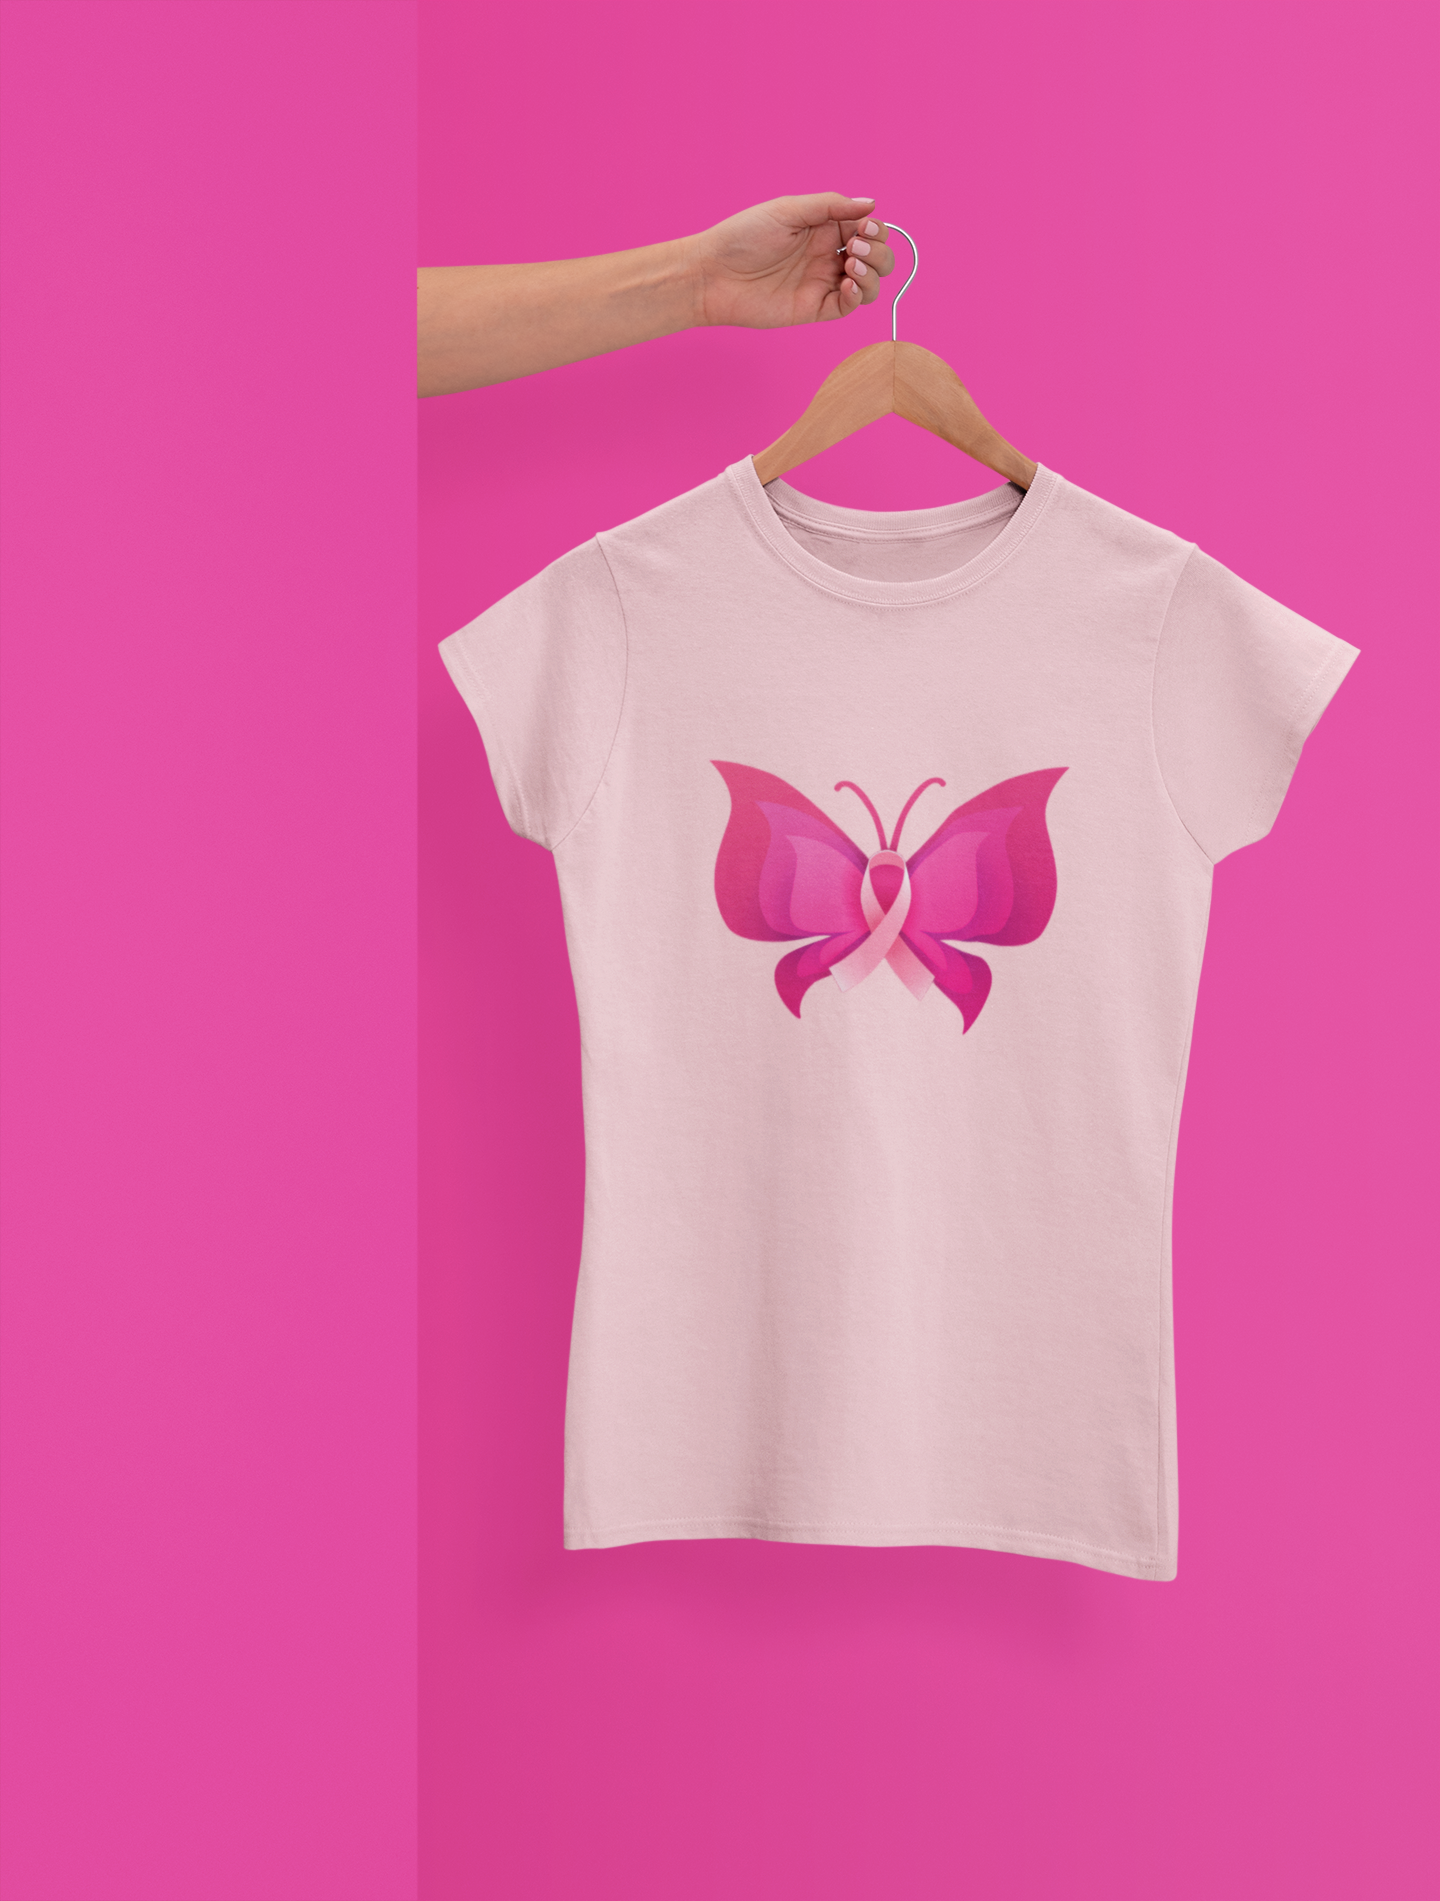 Breast Cancer Awareness - Fly The Butterfly Ribbon